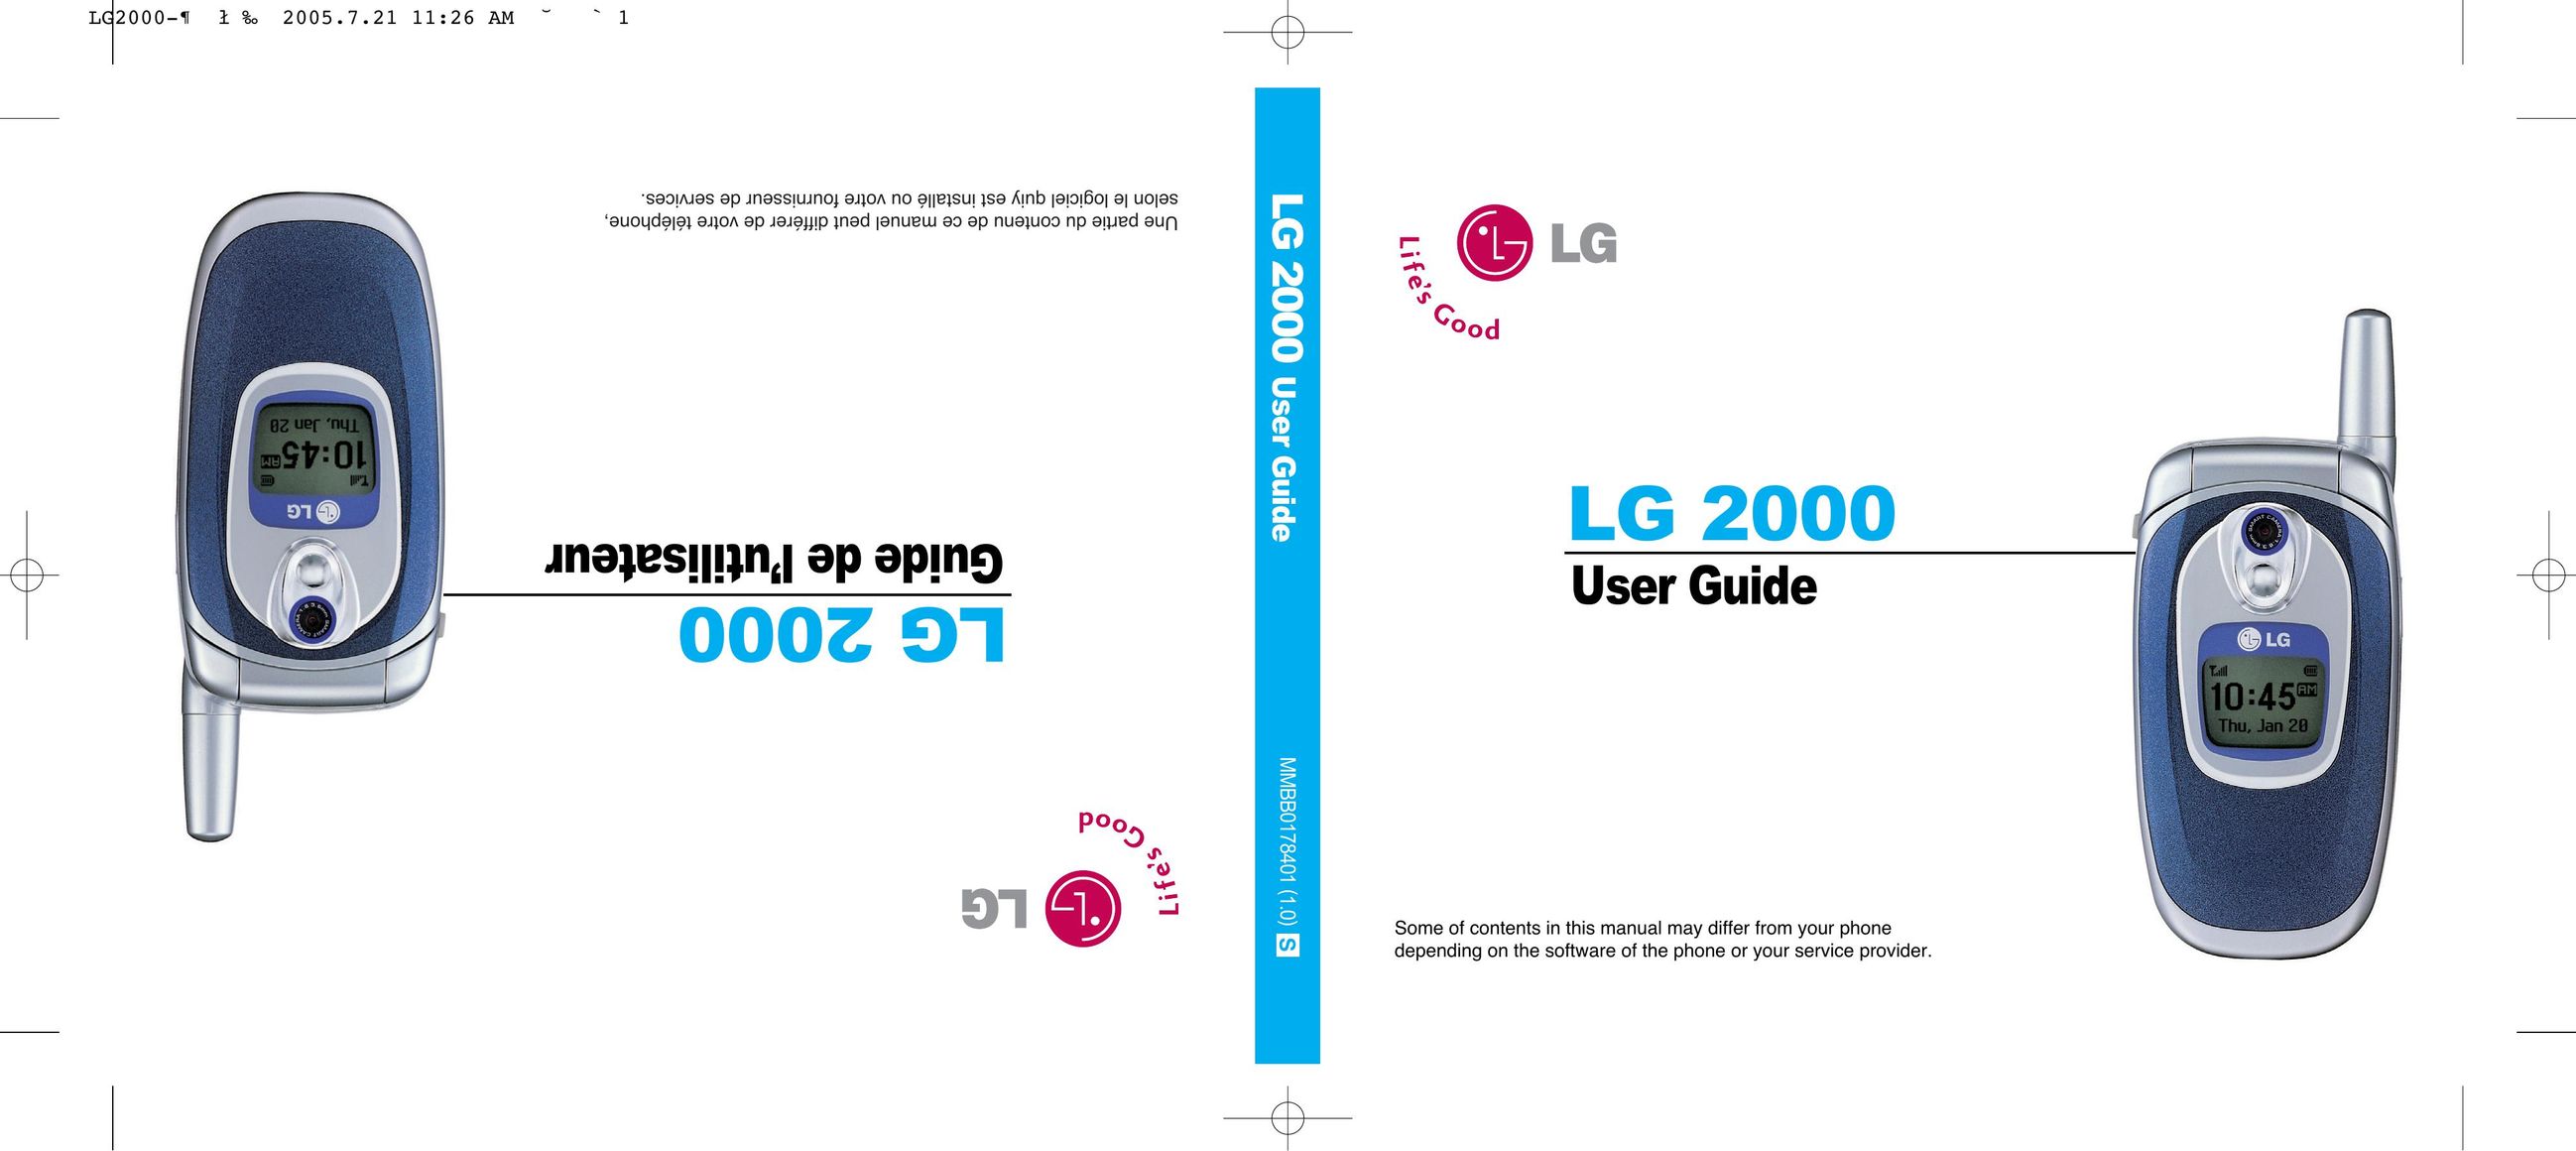 LG Electronics 2000 Cell Phone User Manual